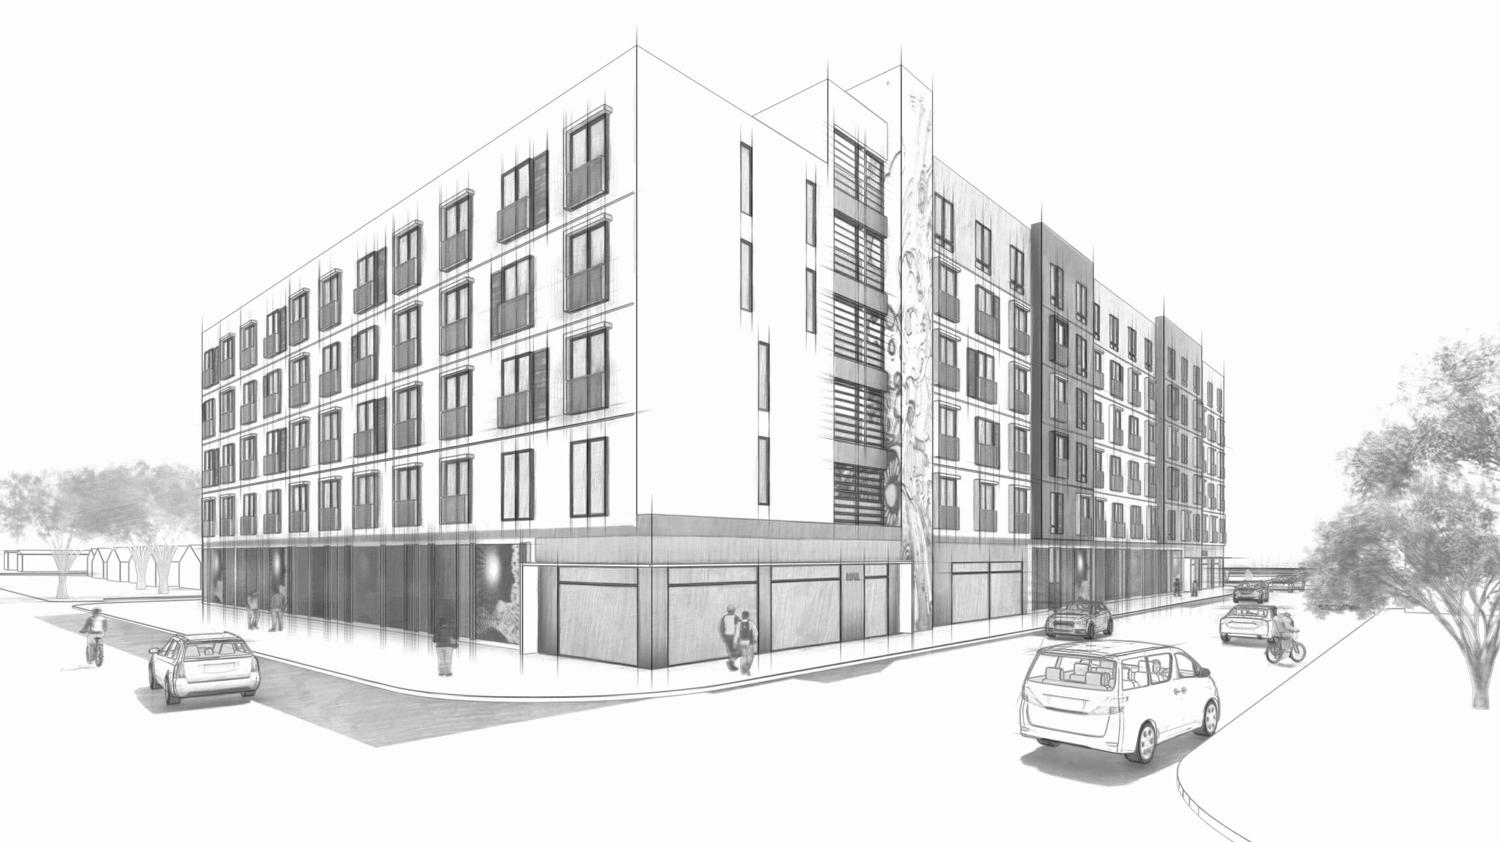 802 South 1st Street between East Virginia Street and South 2nd Street, illustration via AO Architects